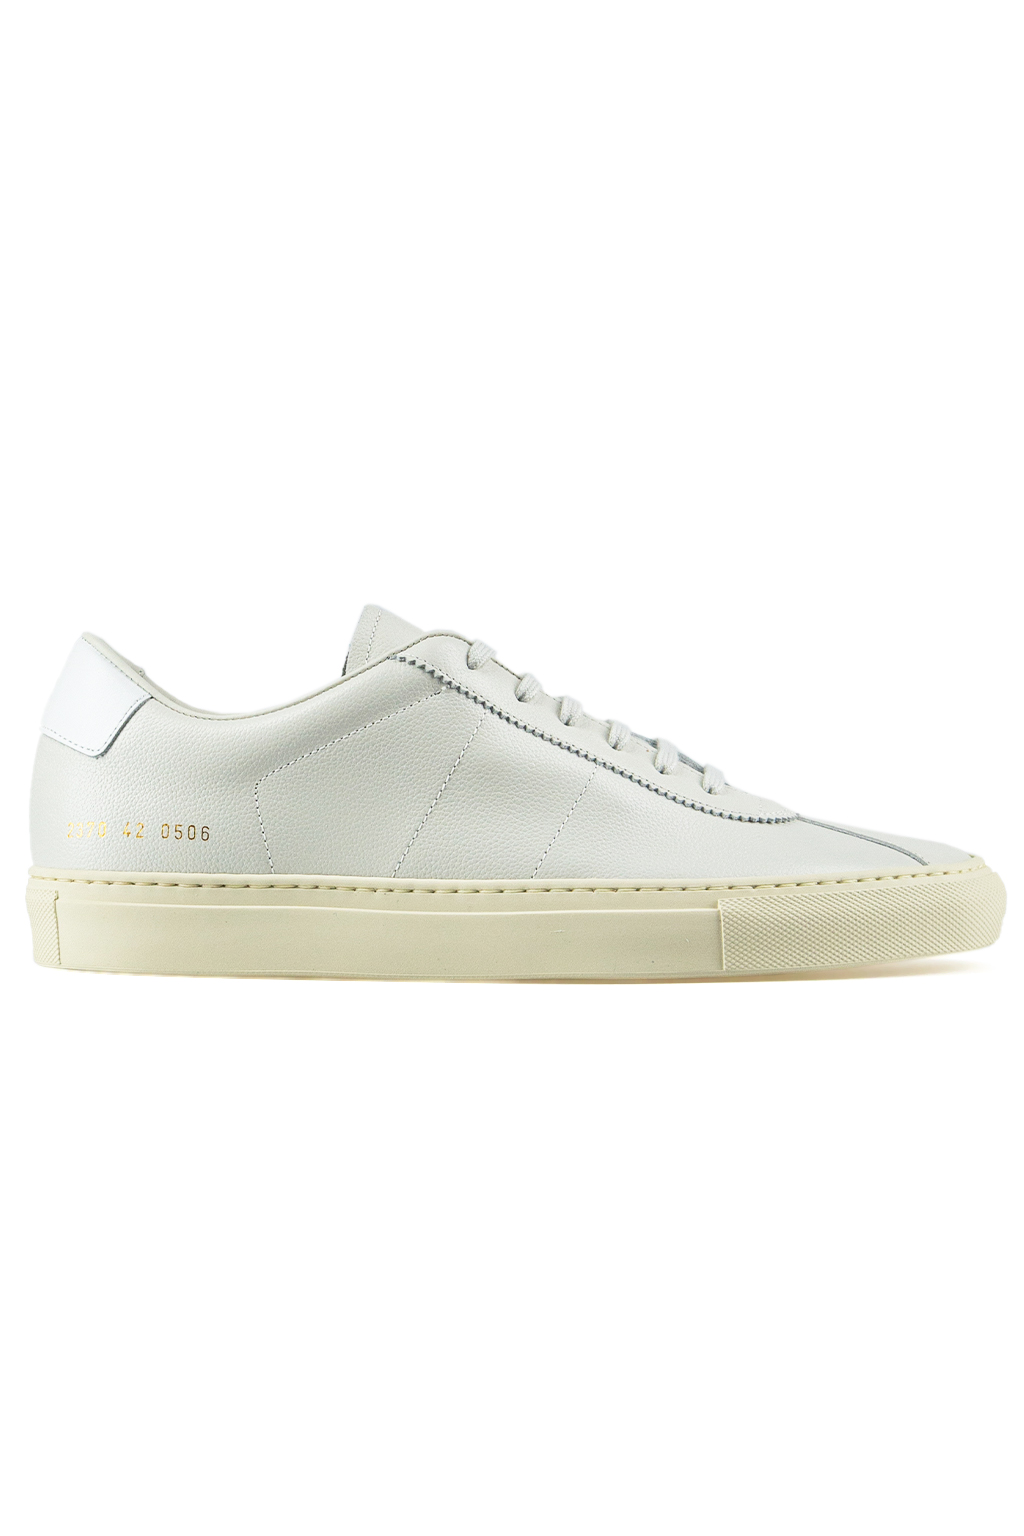 Common Projects Toronto